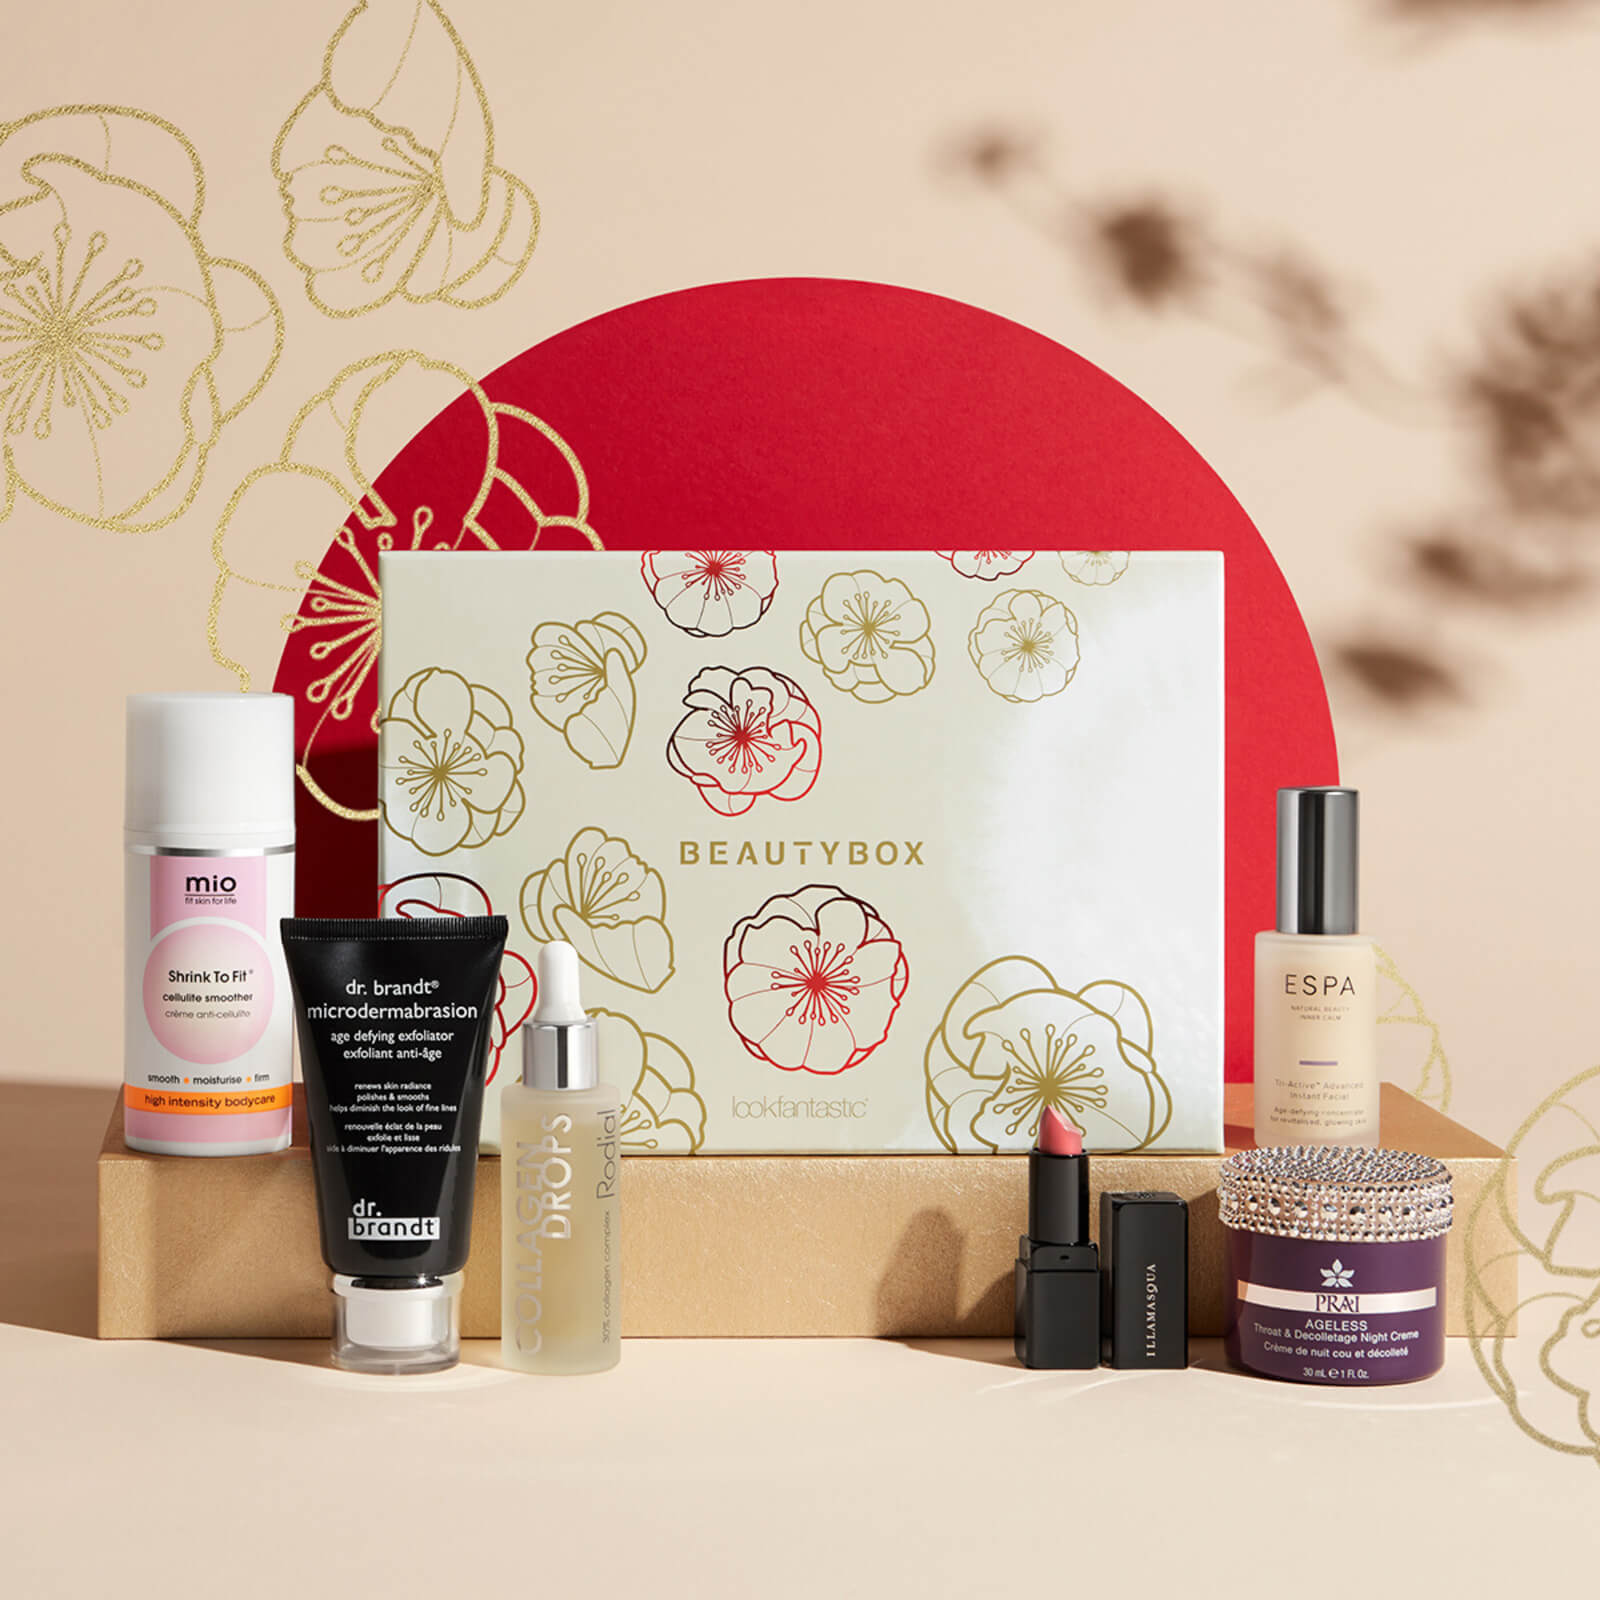 Look Fantastic Japan Limited Edition Beauty Box Available Now + Full Spoilers!